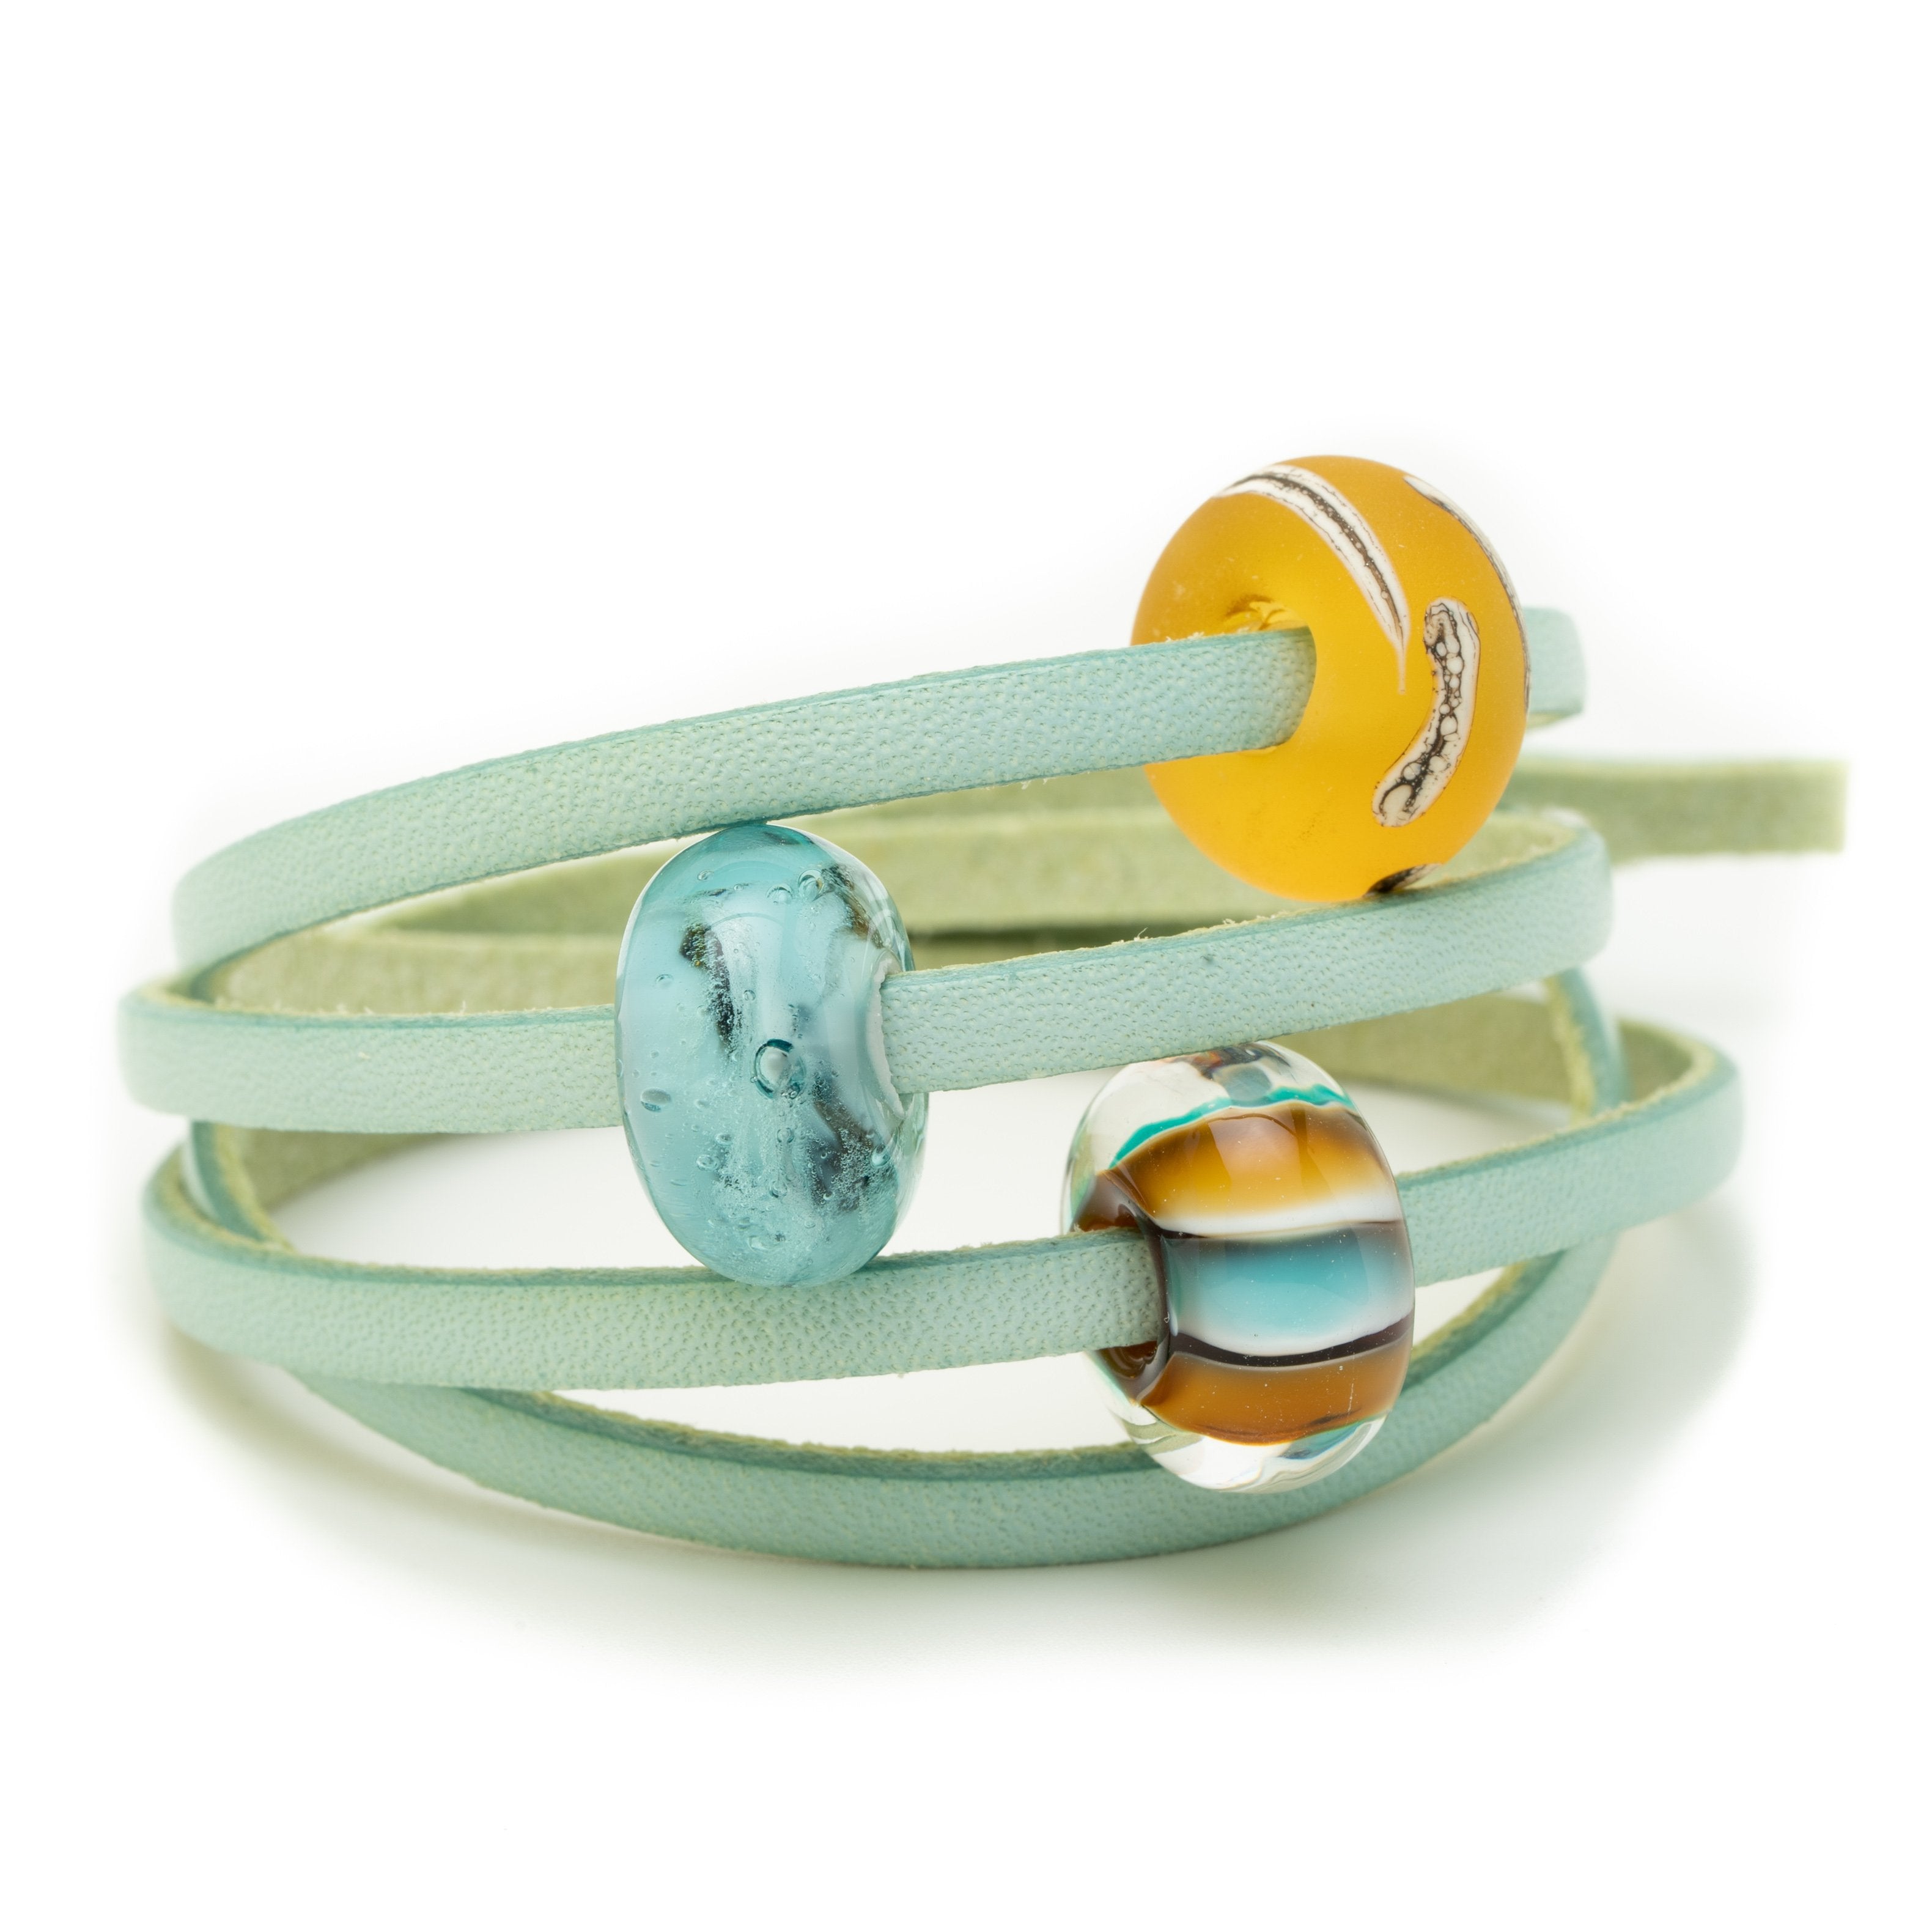 Aqua leather wrap bracelet with amber and blue glass beads representing beach in South Devon, UK.